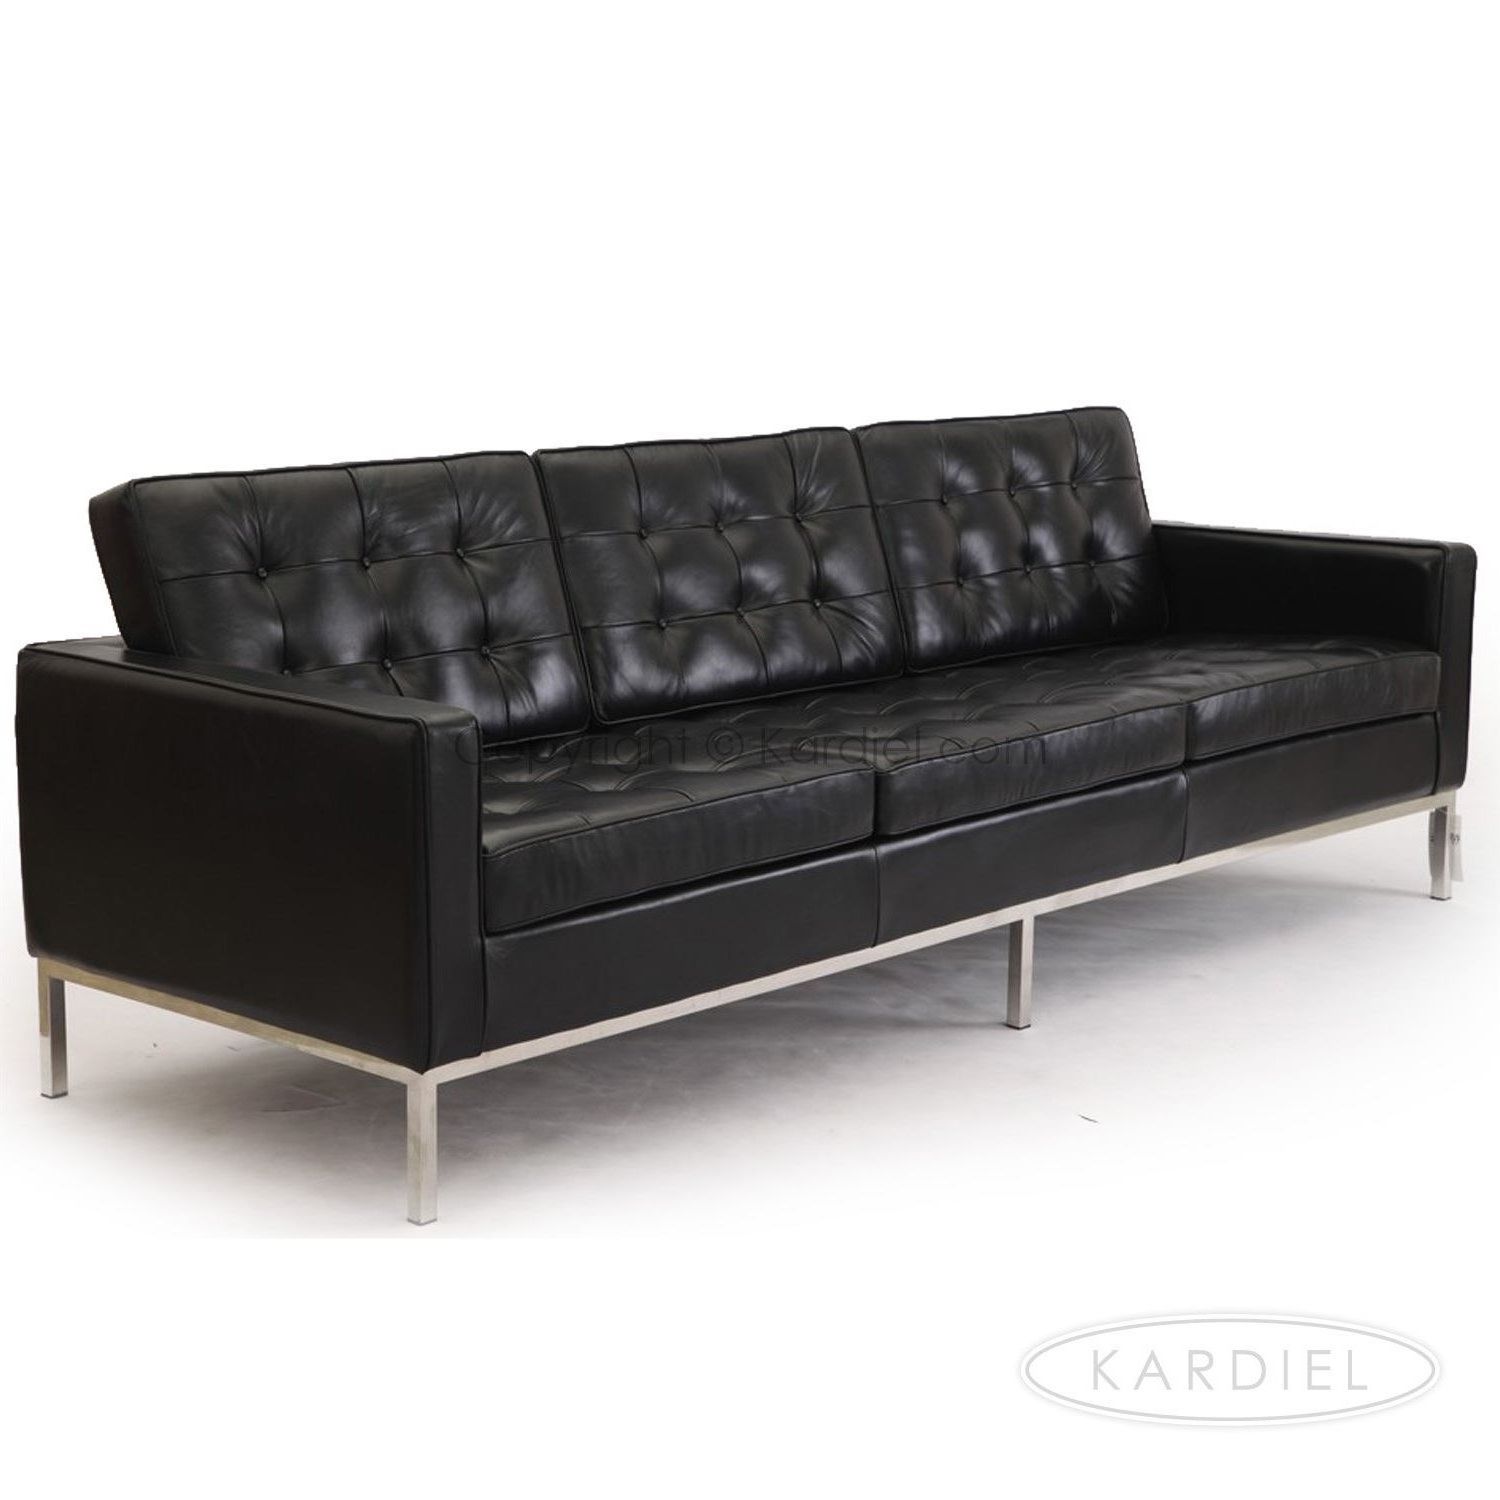 Most Popular Florence Knoll Style Sofas For Kardiel Florence Knoll Aniline Sofa 3 Seat Style Black Leather (View 10 of 20)